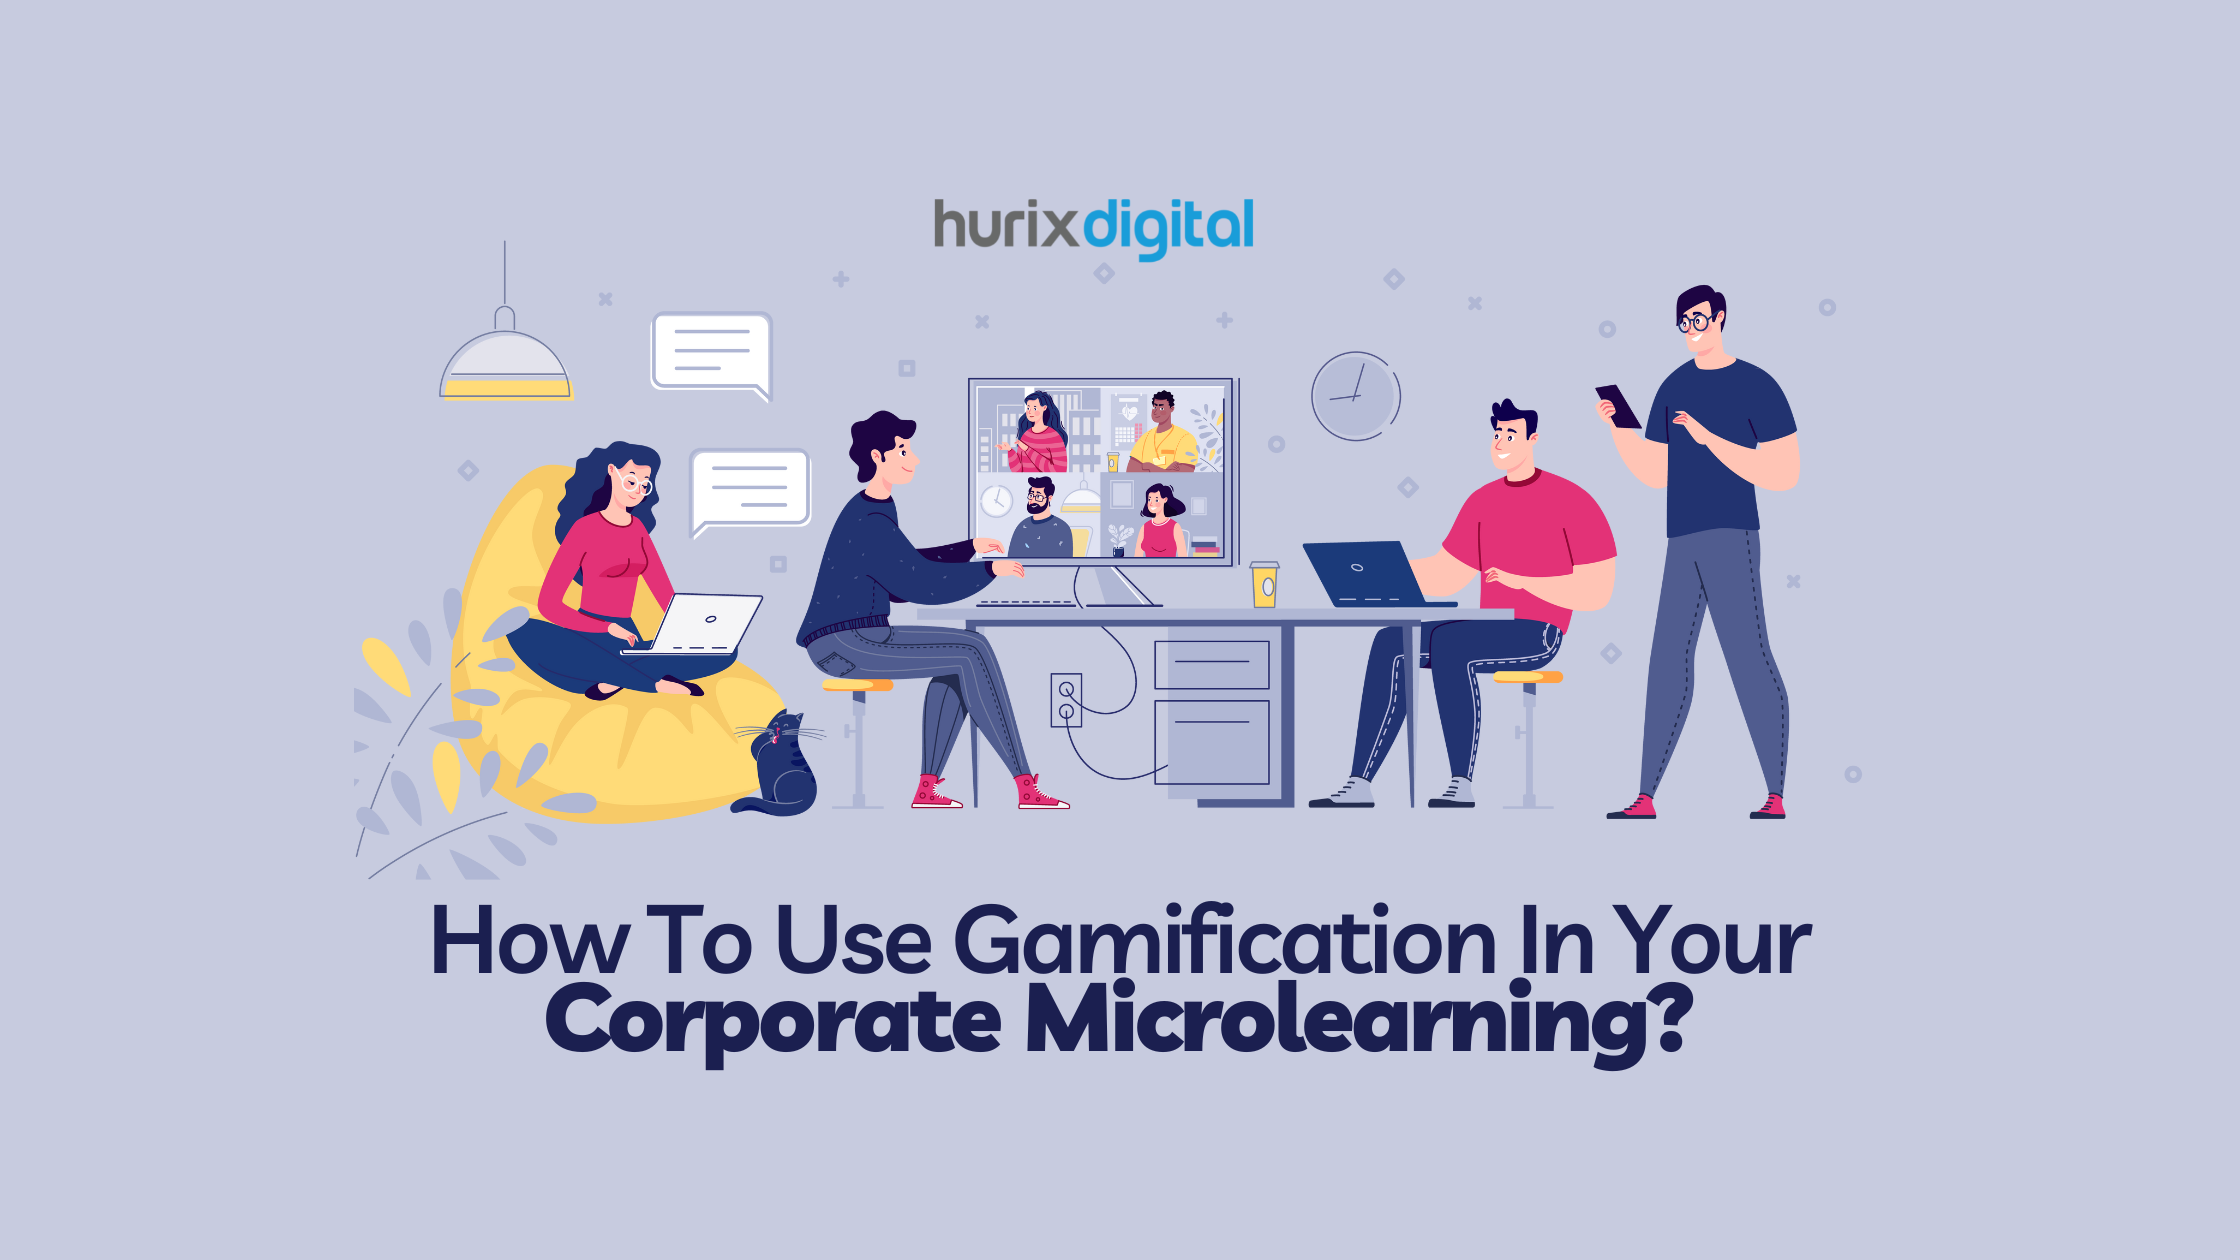 How To Use Gamification In Your Corporate Microlearning?